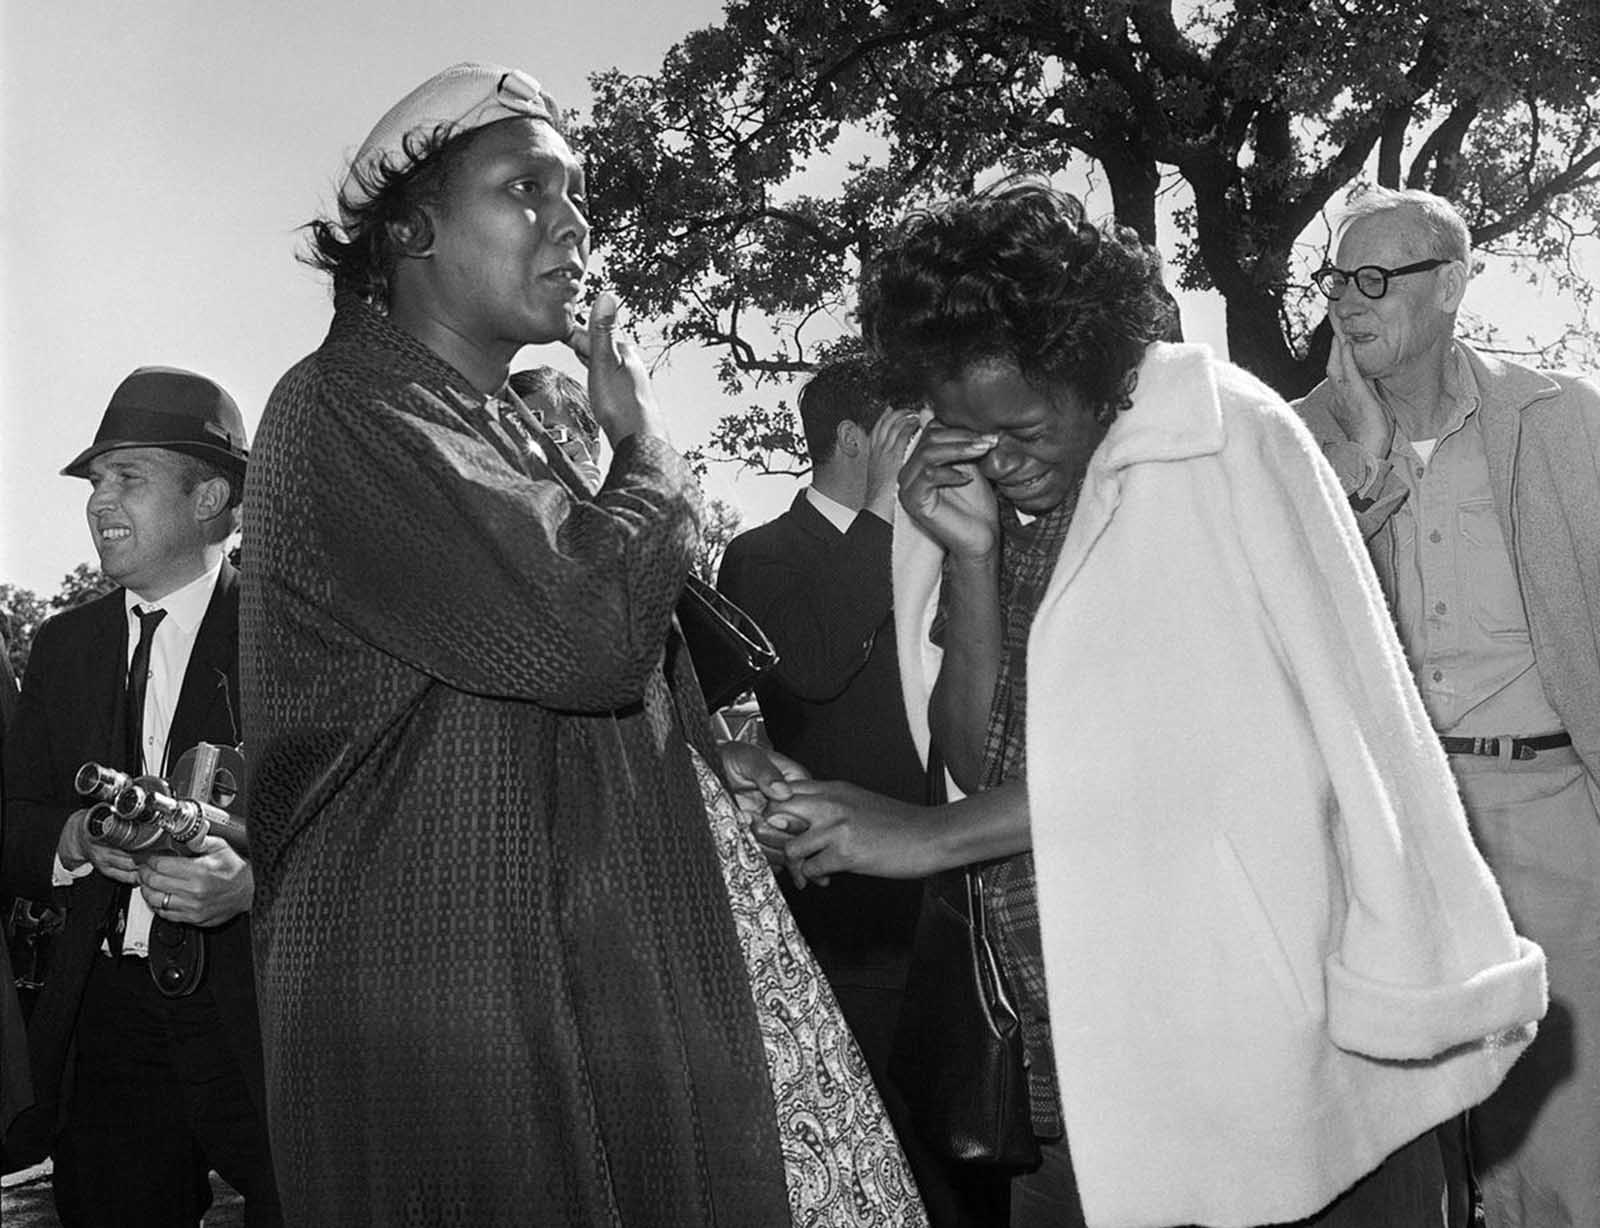 Women burst into tears outside Parkland Hospital upon hearing that President John F. Kennedy died from a gunshot wound while riding in a motorcade in Dallas, on November 22, 1963.